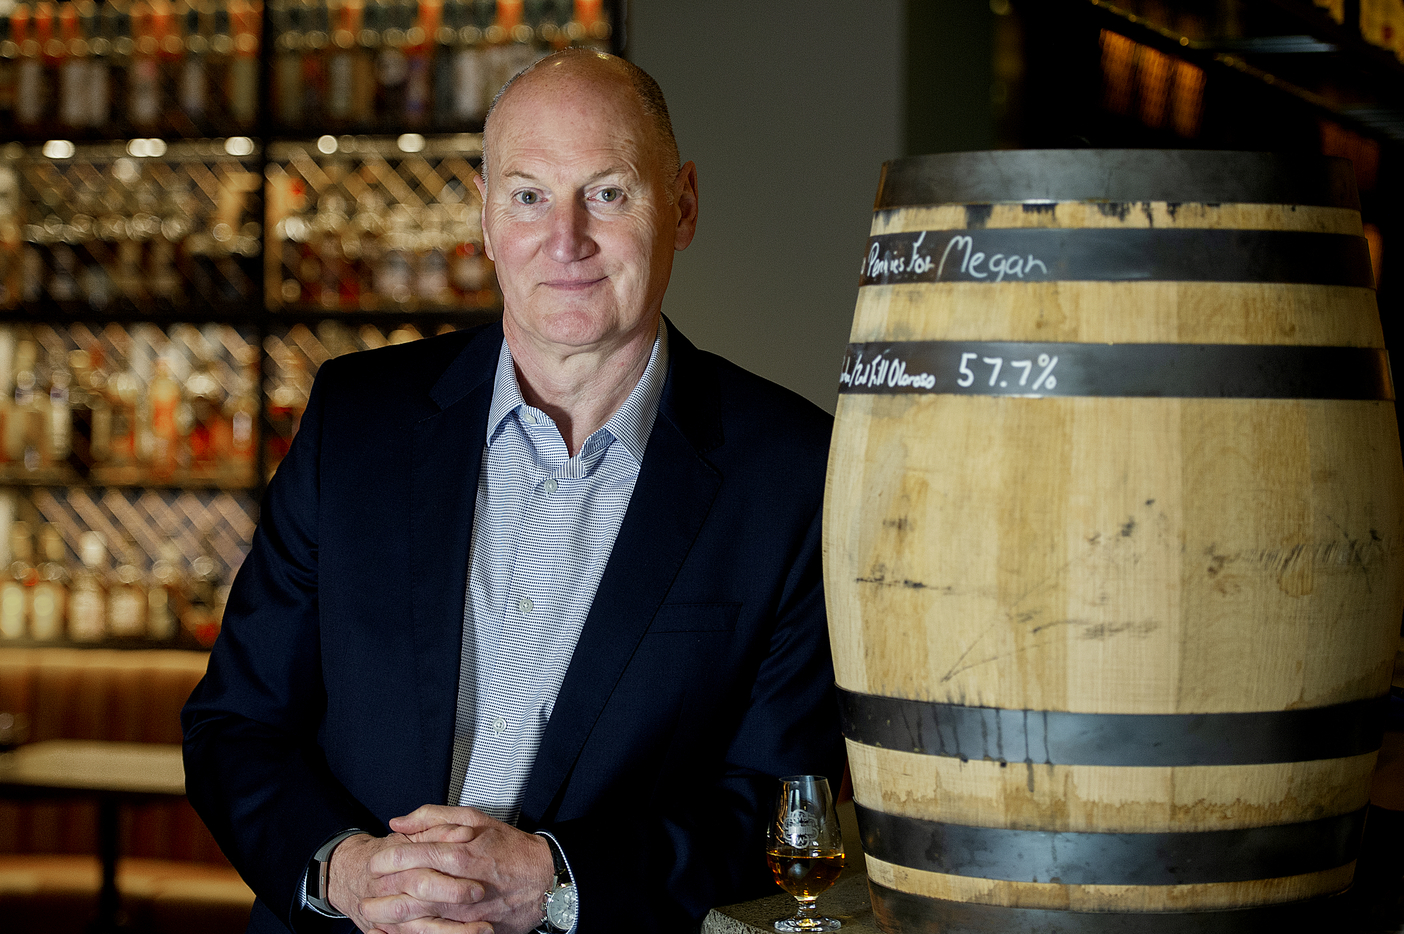 RBS & Lombard provide £19.5m funding package to The Artisanal Spirits Company